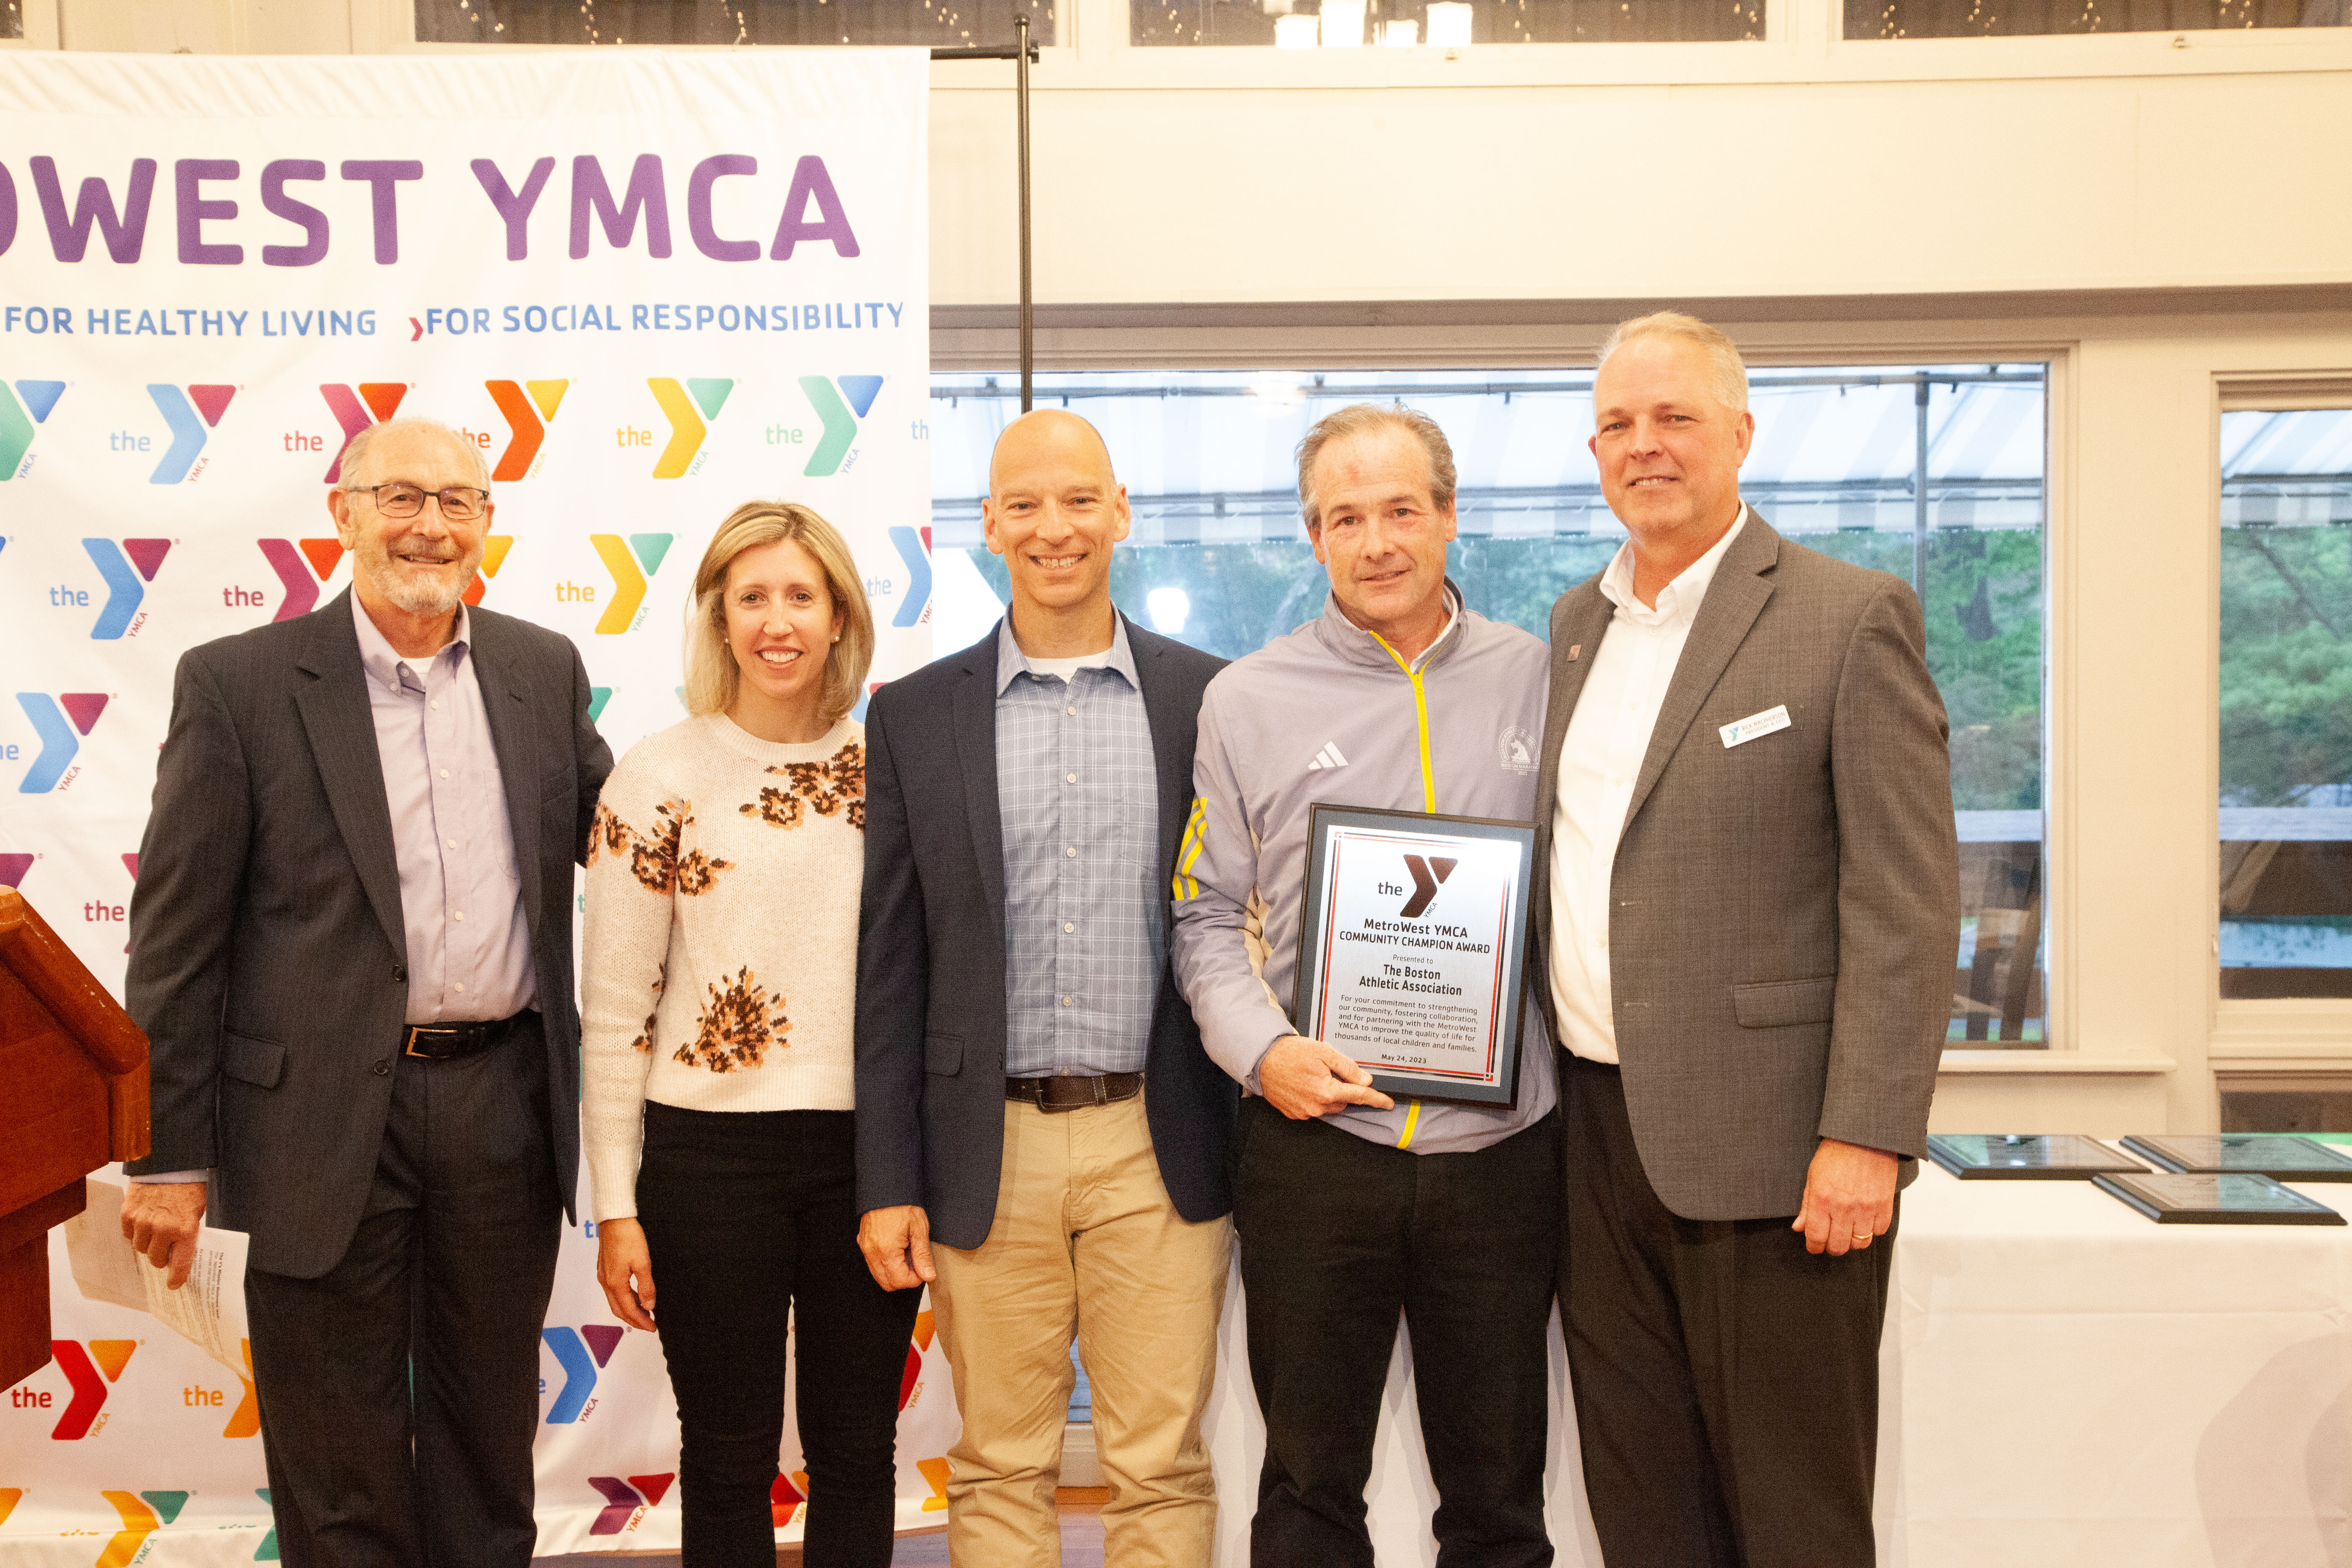 MetroWest YMCA and B.A.A. Presentation